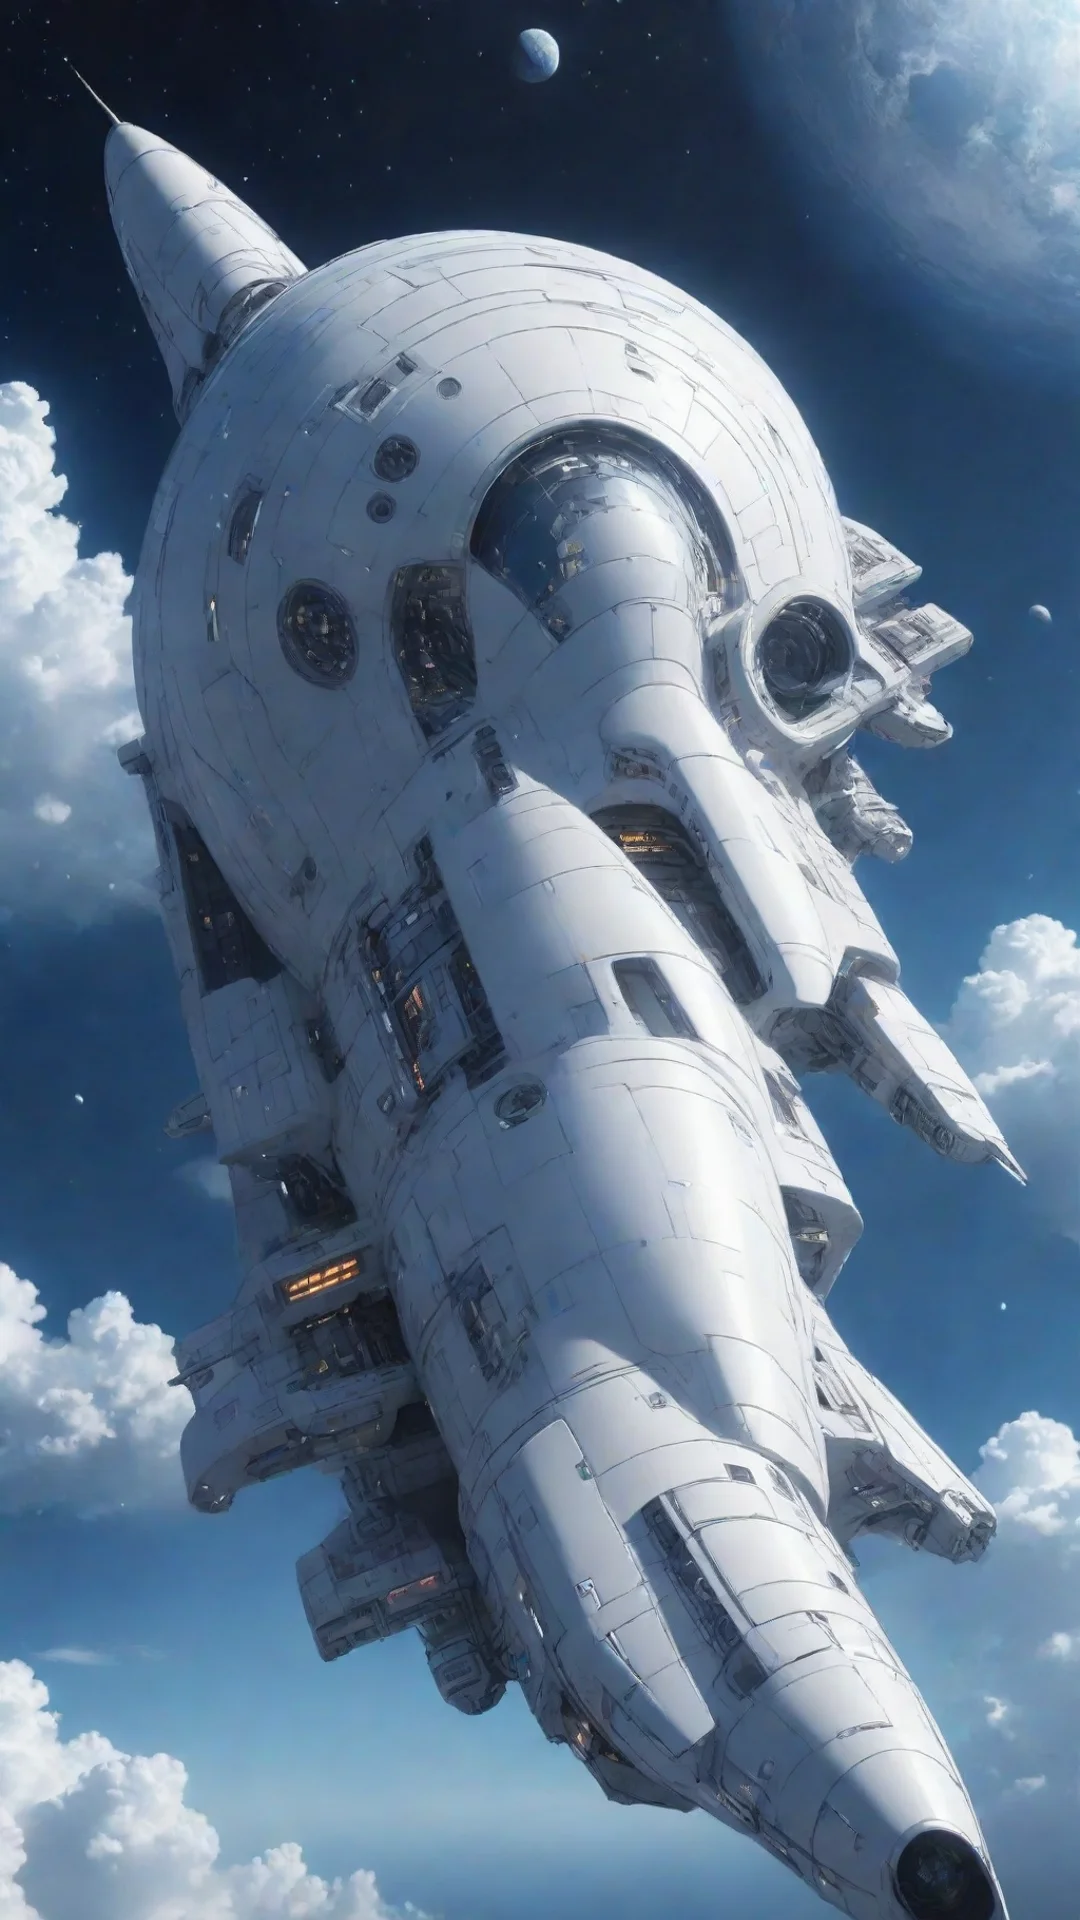 aiamazing futuristic space ship in the sky in the style of manga awesome portrait 2 tall